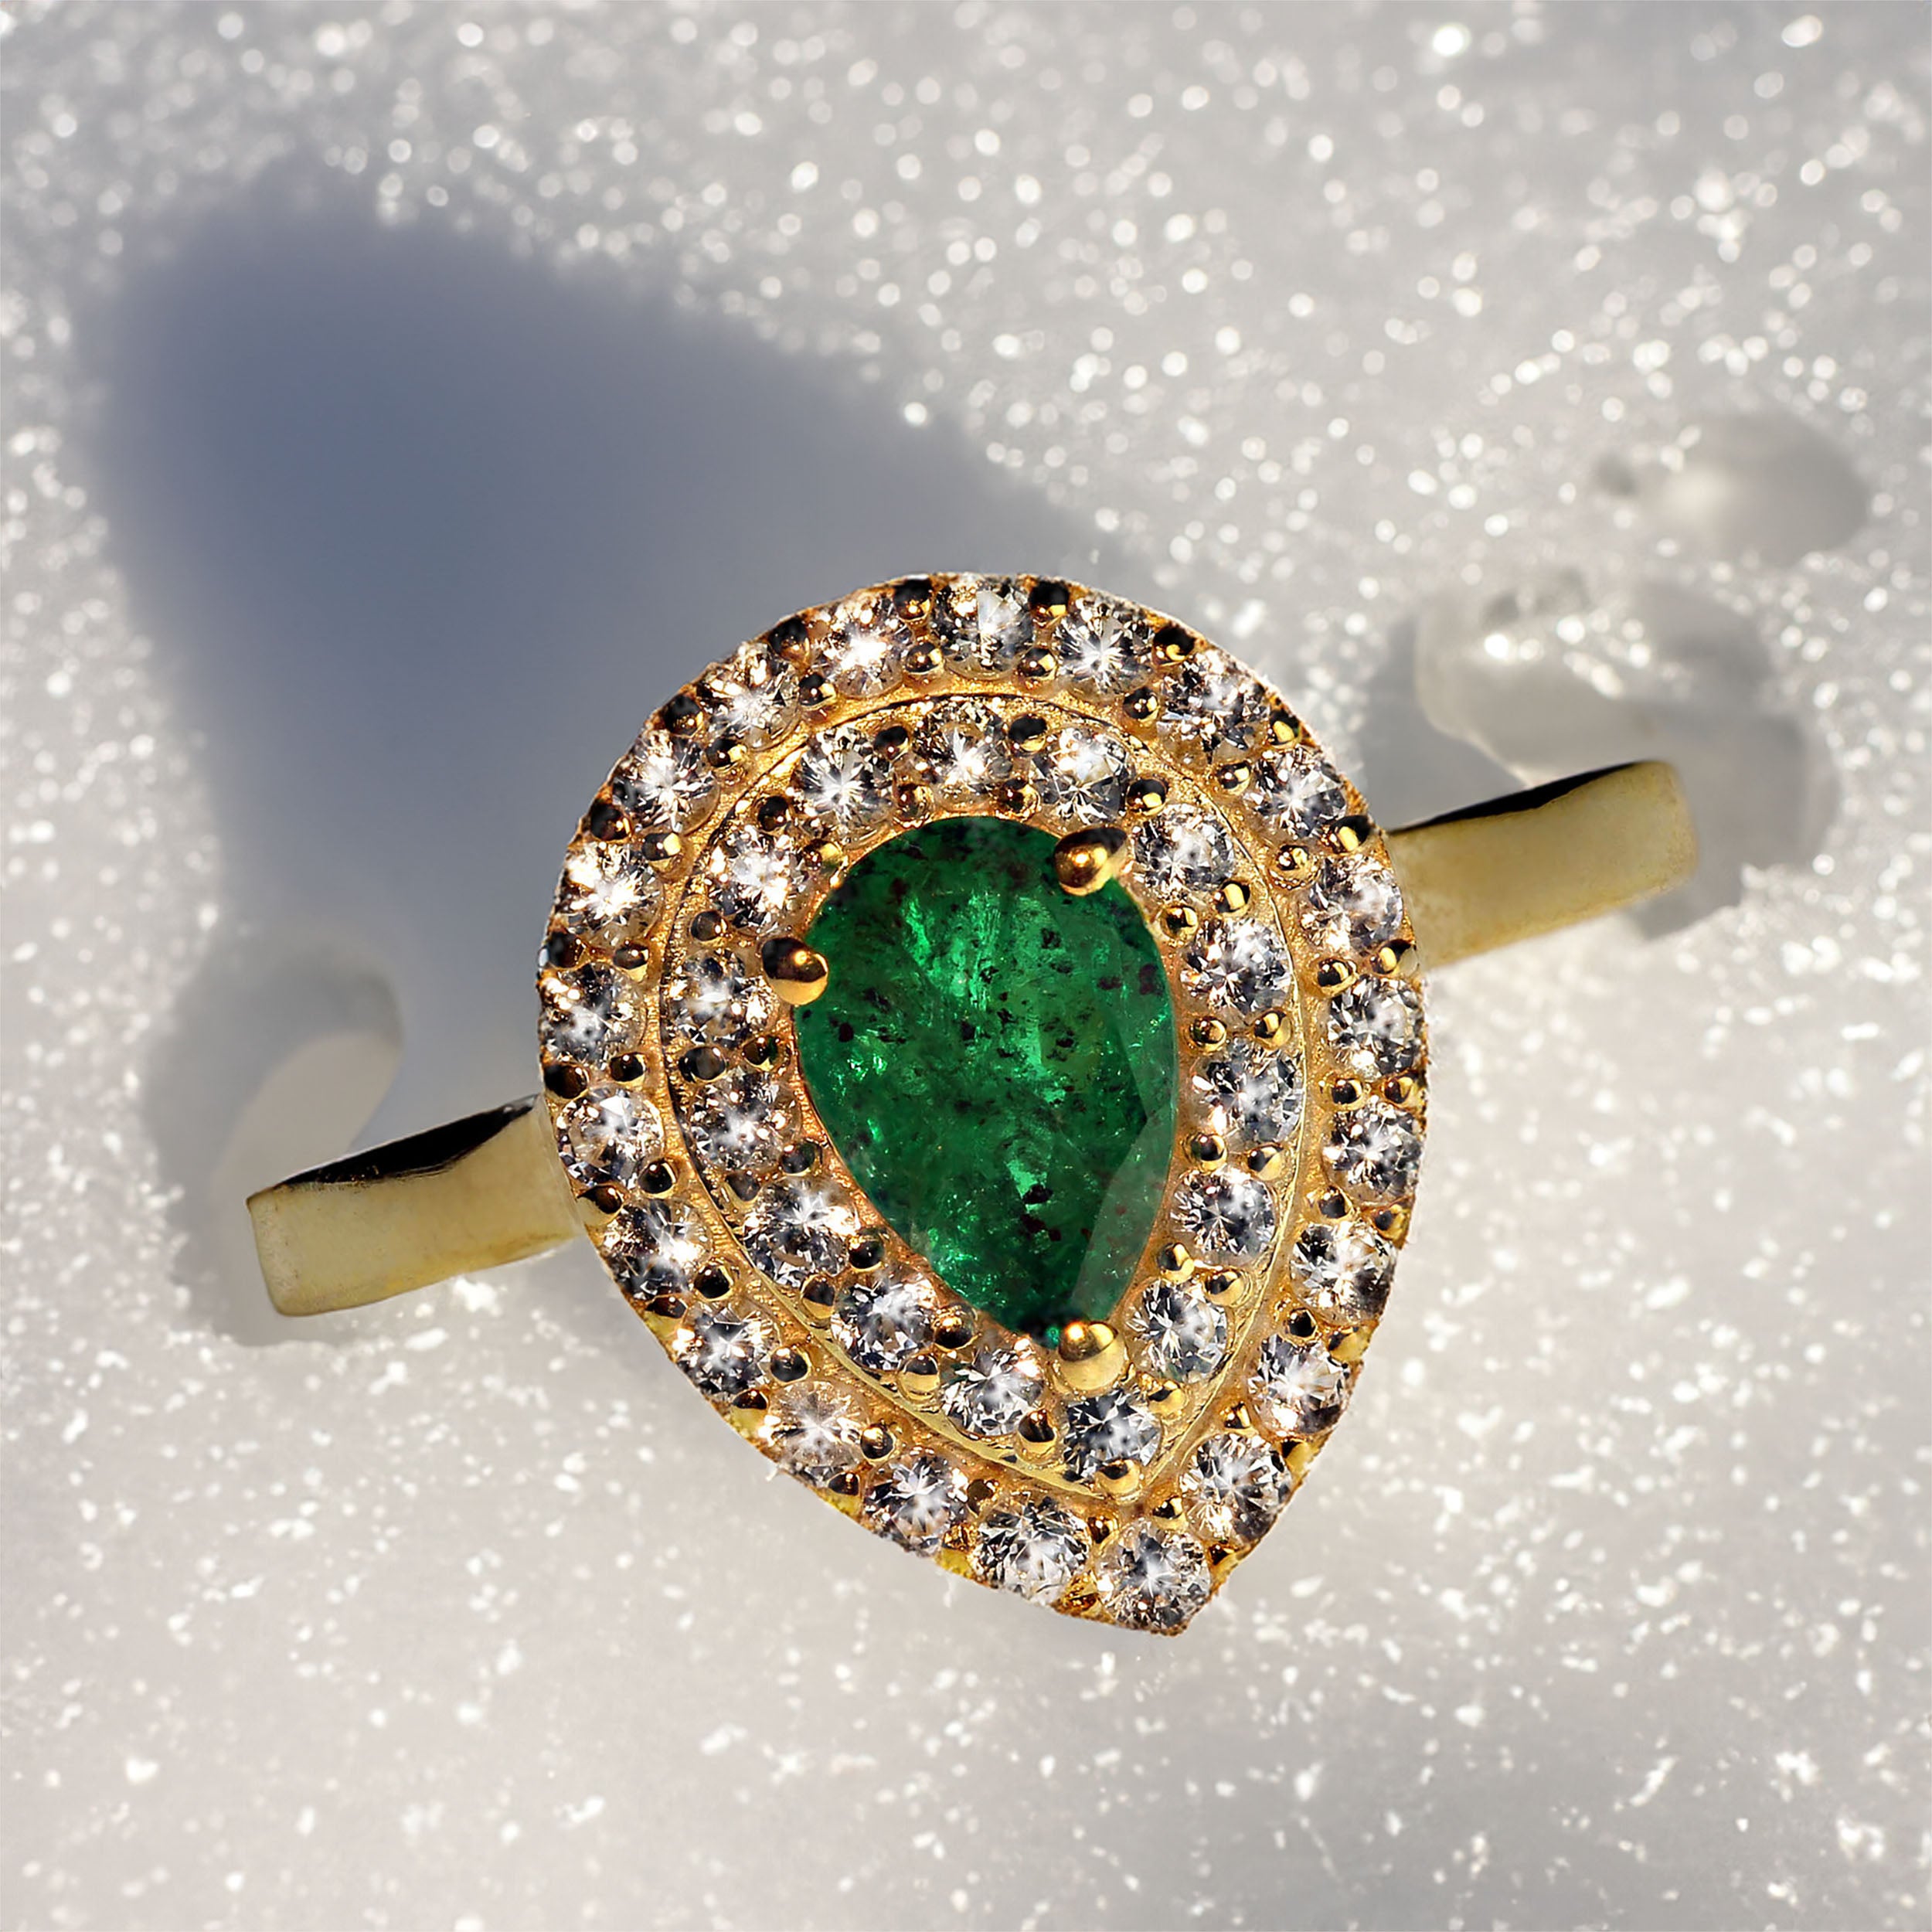 Elegant pear shaped brazilian Emerald surrounded by two rows of white Sapphires, all set in gold rhodium over Sterling Silver ring. This lovely deep green brazilian Emerald weighs in at 0.73 carats.  The ring itself is a generous 15 x 12 MM, making